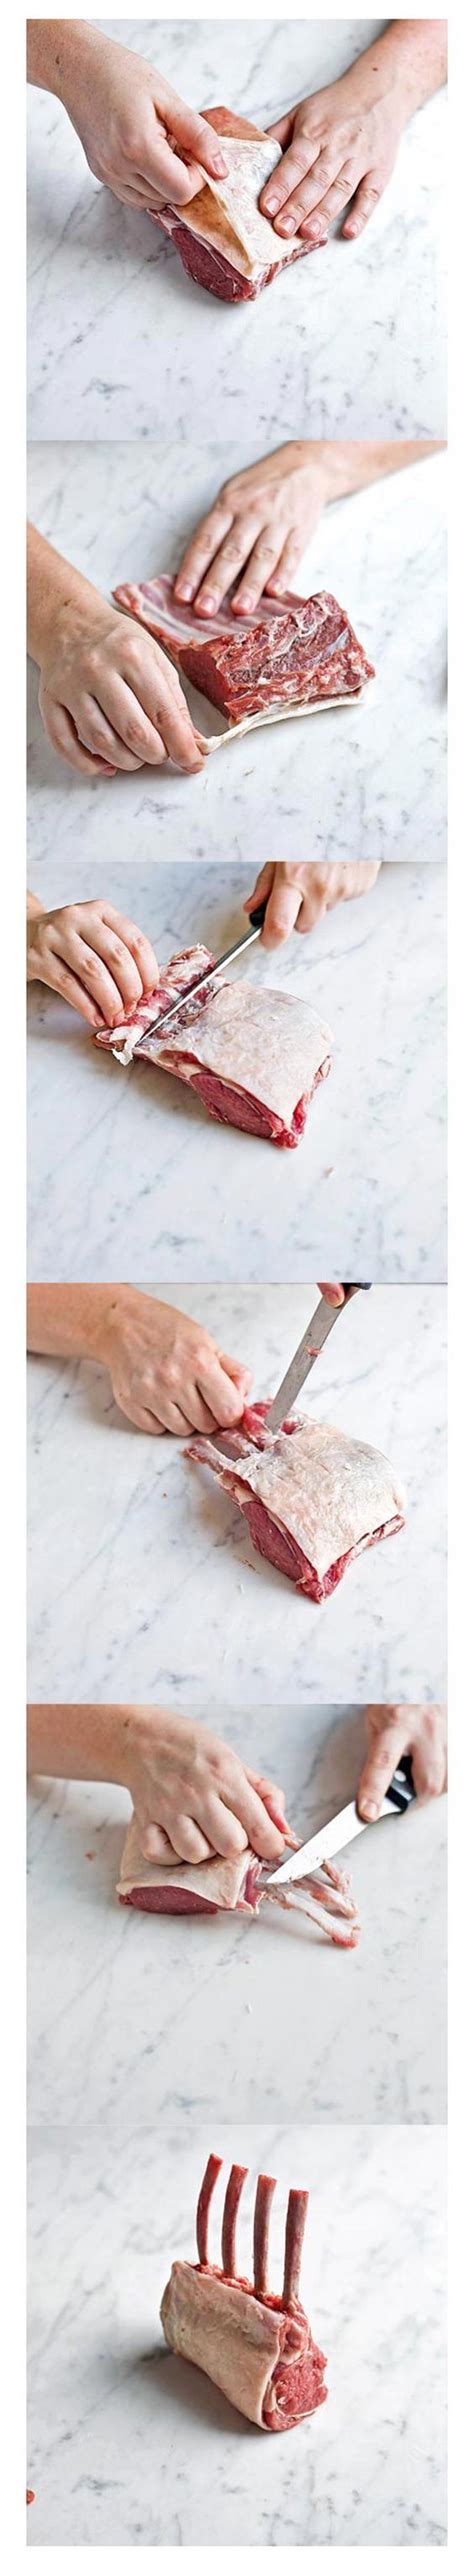 Consider lamb shanks as an example. How to French trim a rack of lamb | delicious. magazine ...